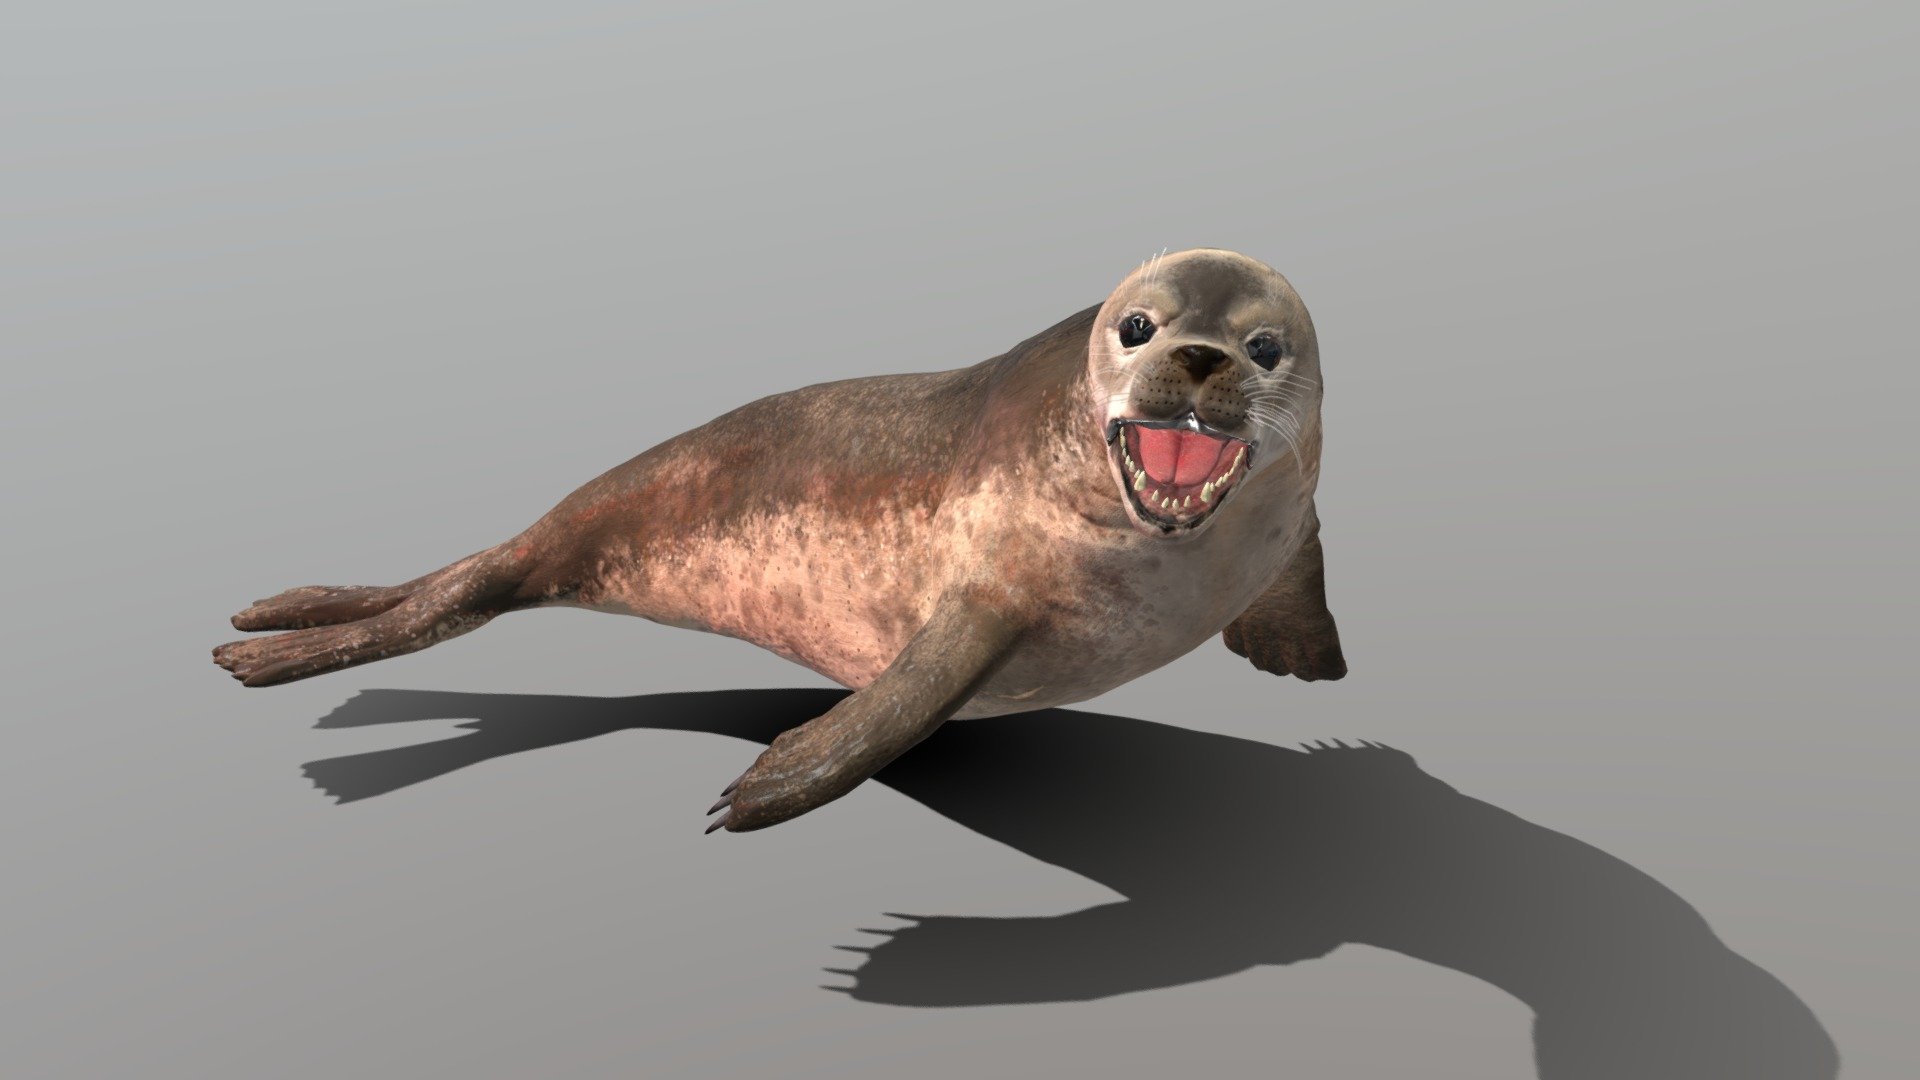 A Seal i made in blender ,full rigged with 4k textures and painted it in substance painter 3d model